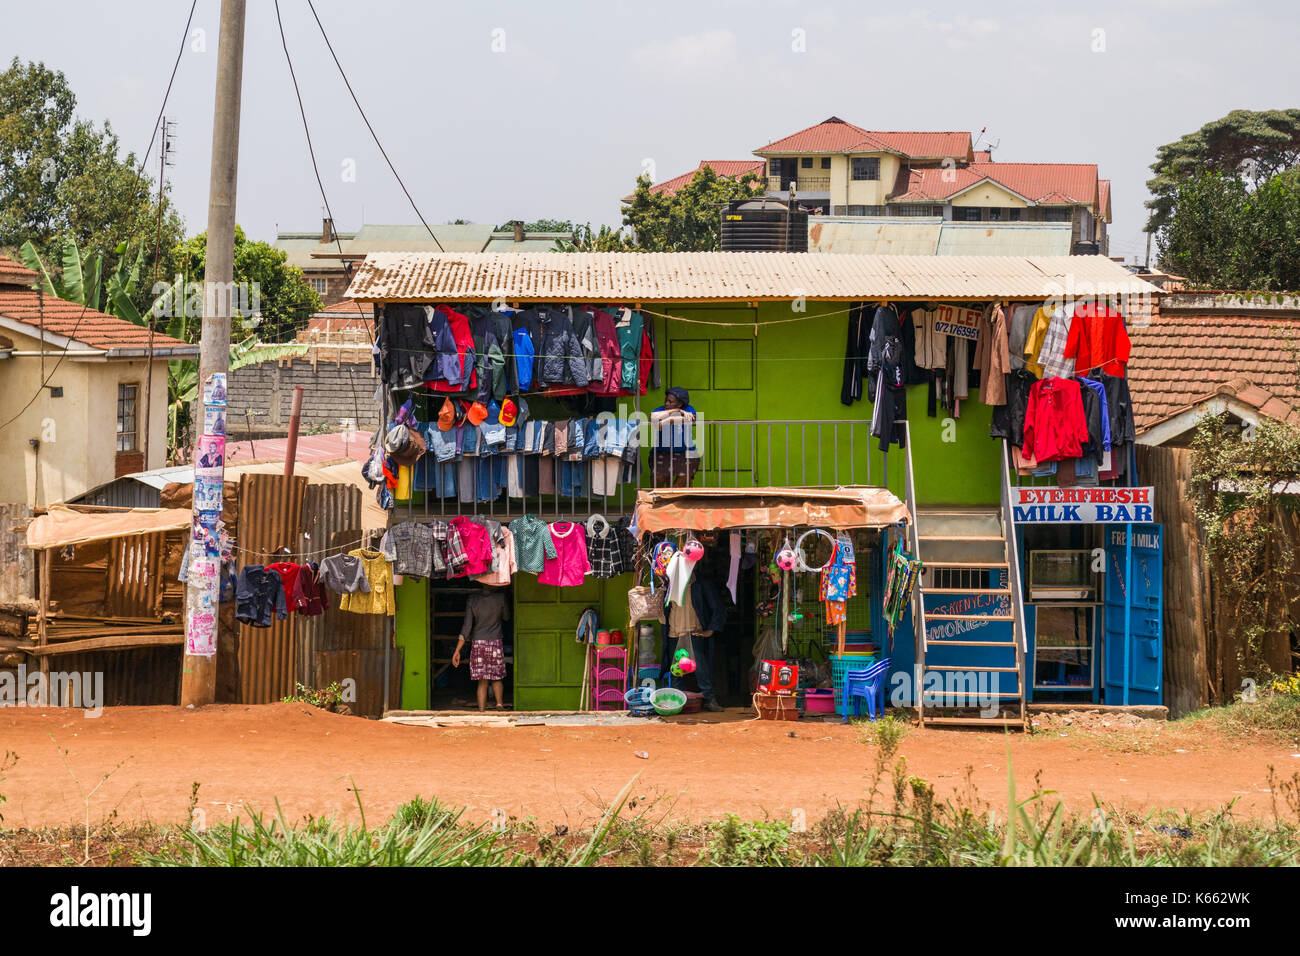 Small building with clothes shop and clothes hanging on the outside, Kenya Stock Photo